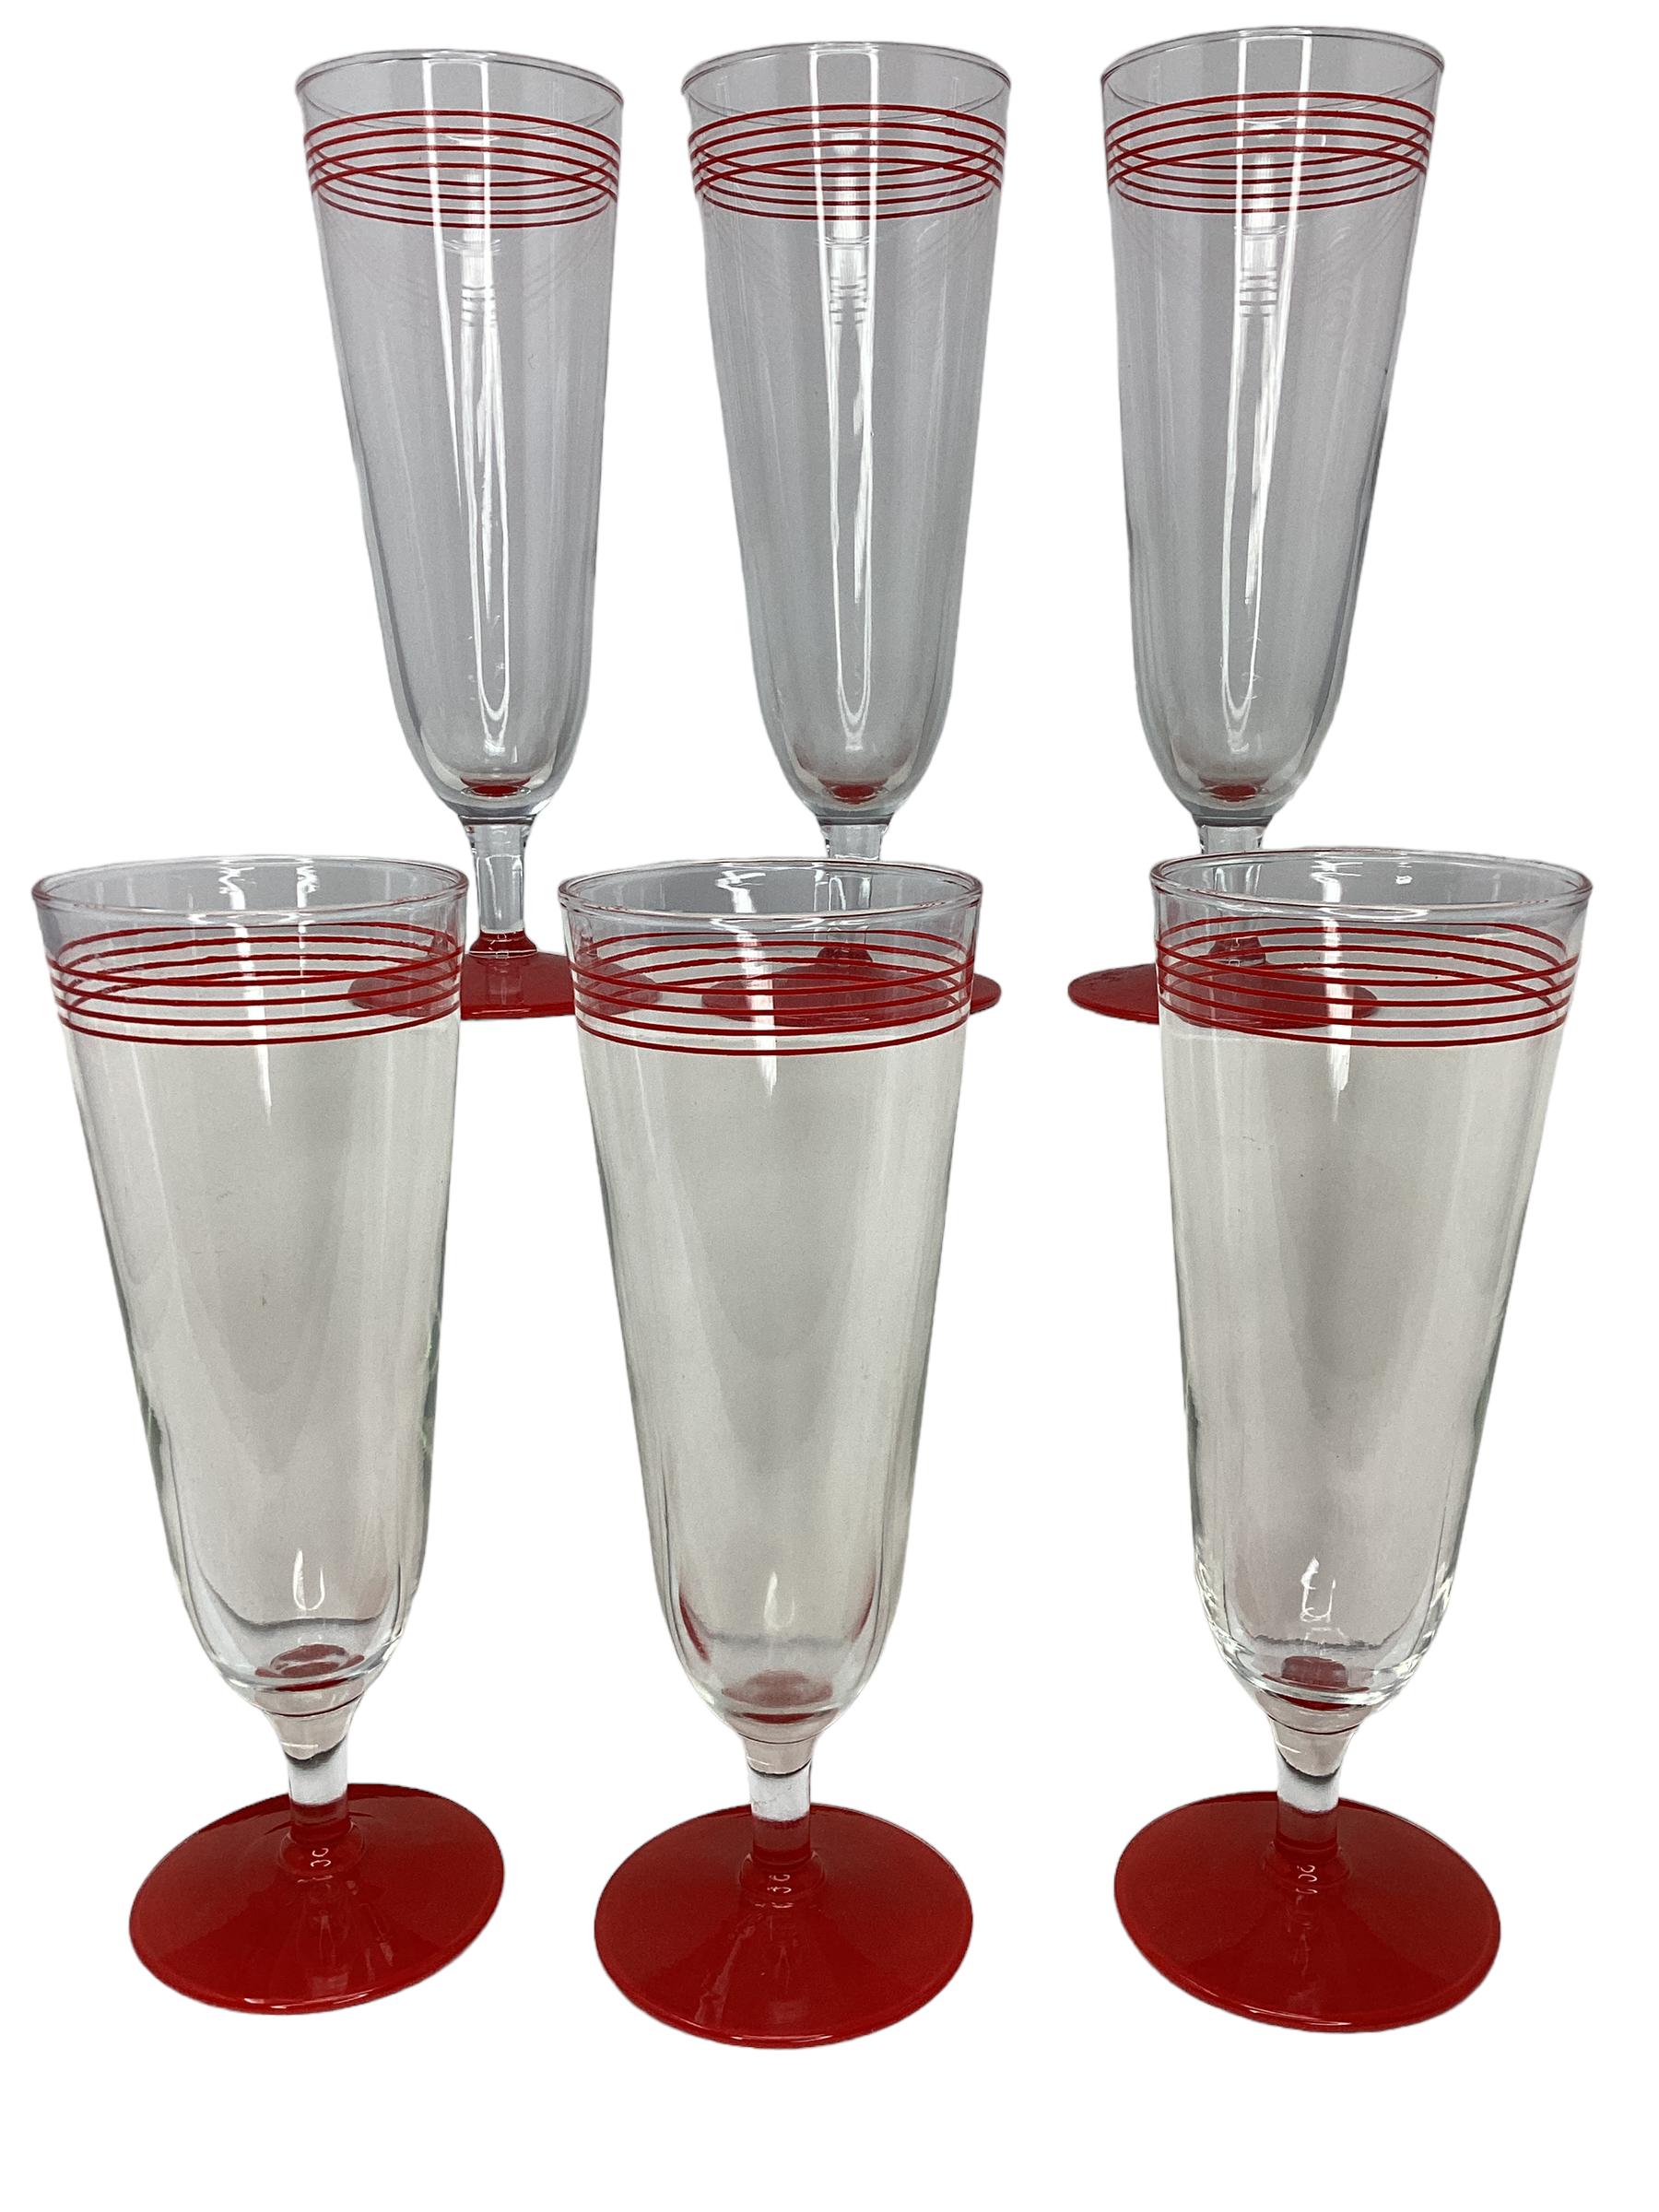 Set of 6 Vintage Pilsner Glasses with a red foot and 3 red rings at the top of the glass.